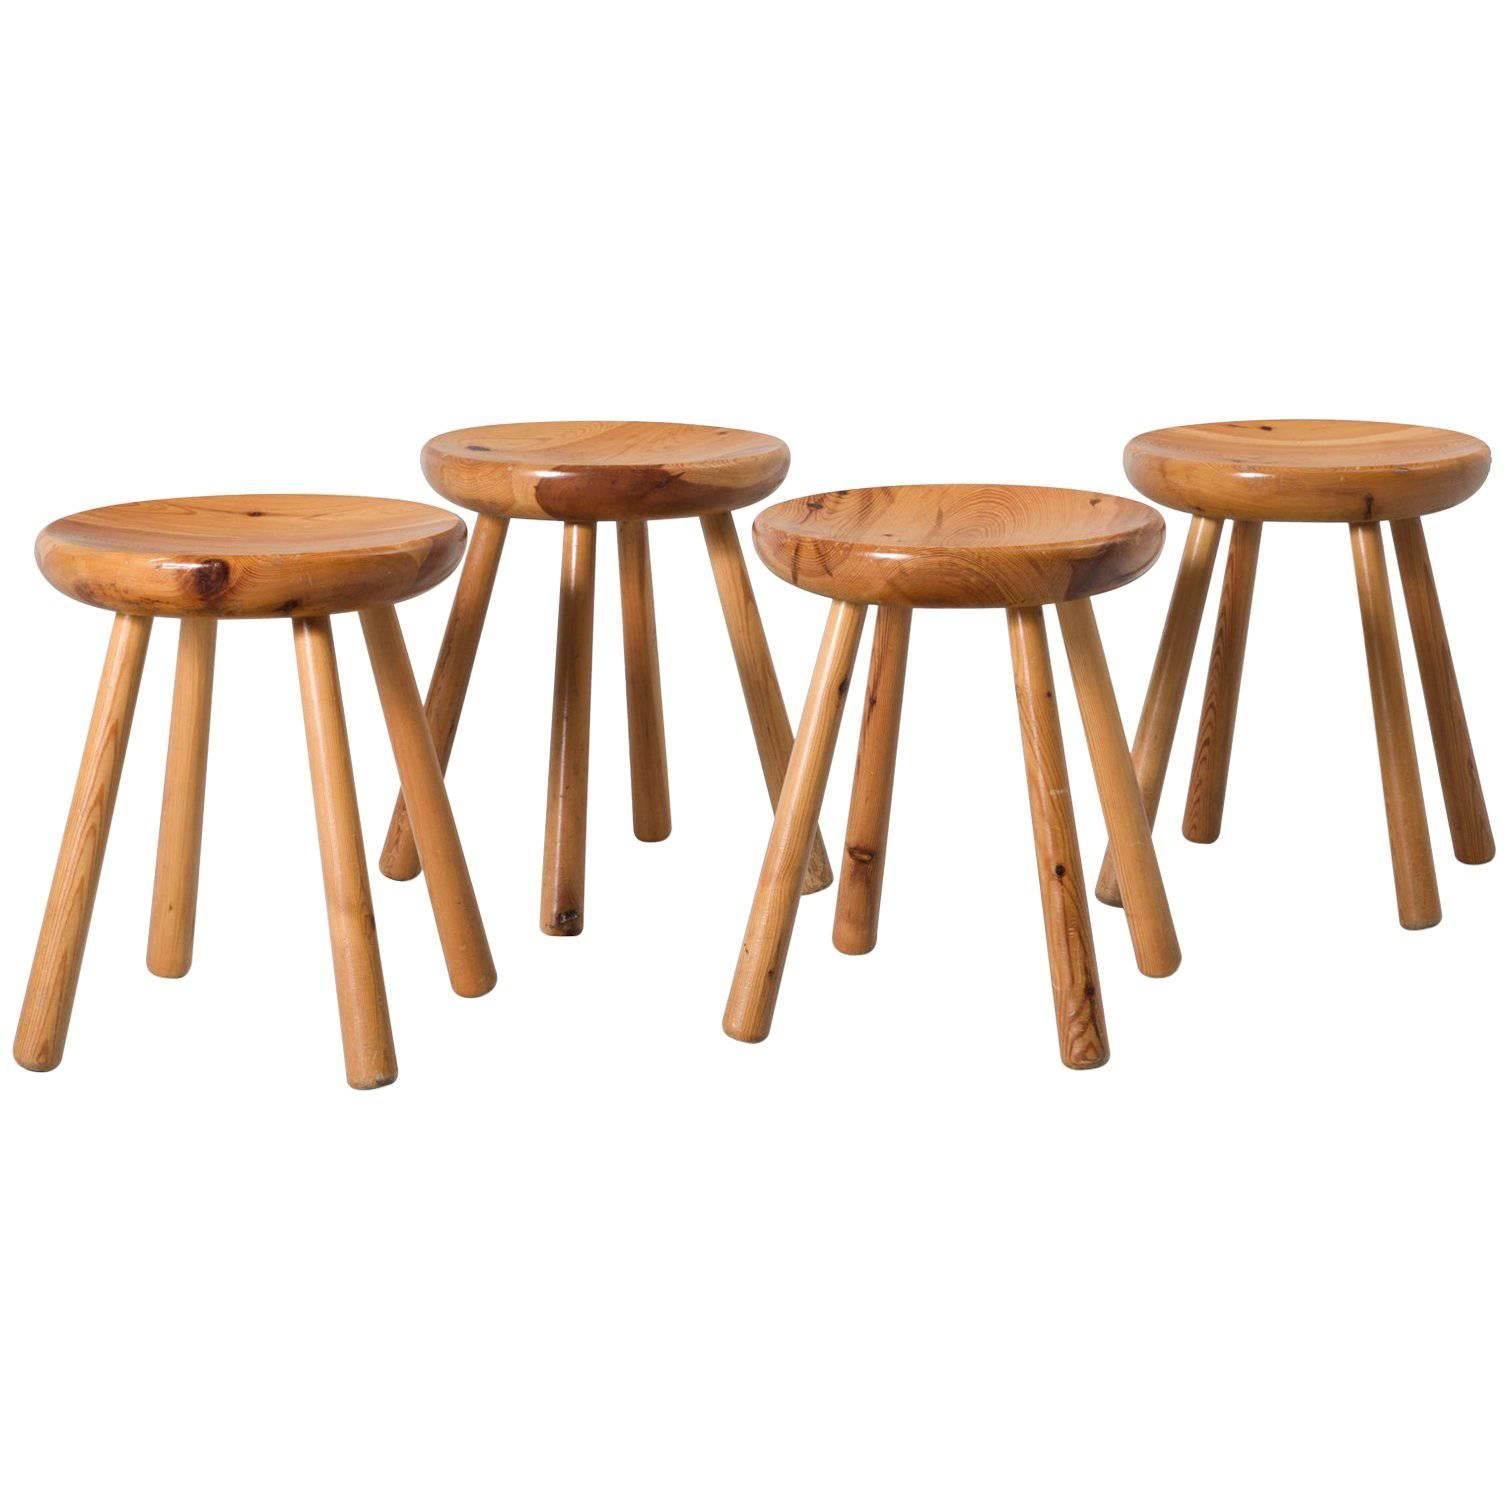 Set of Four Stools in Solid Pine